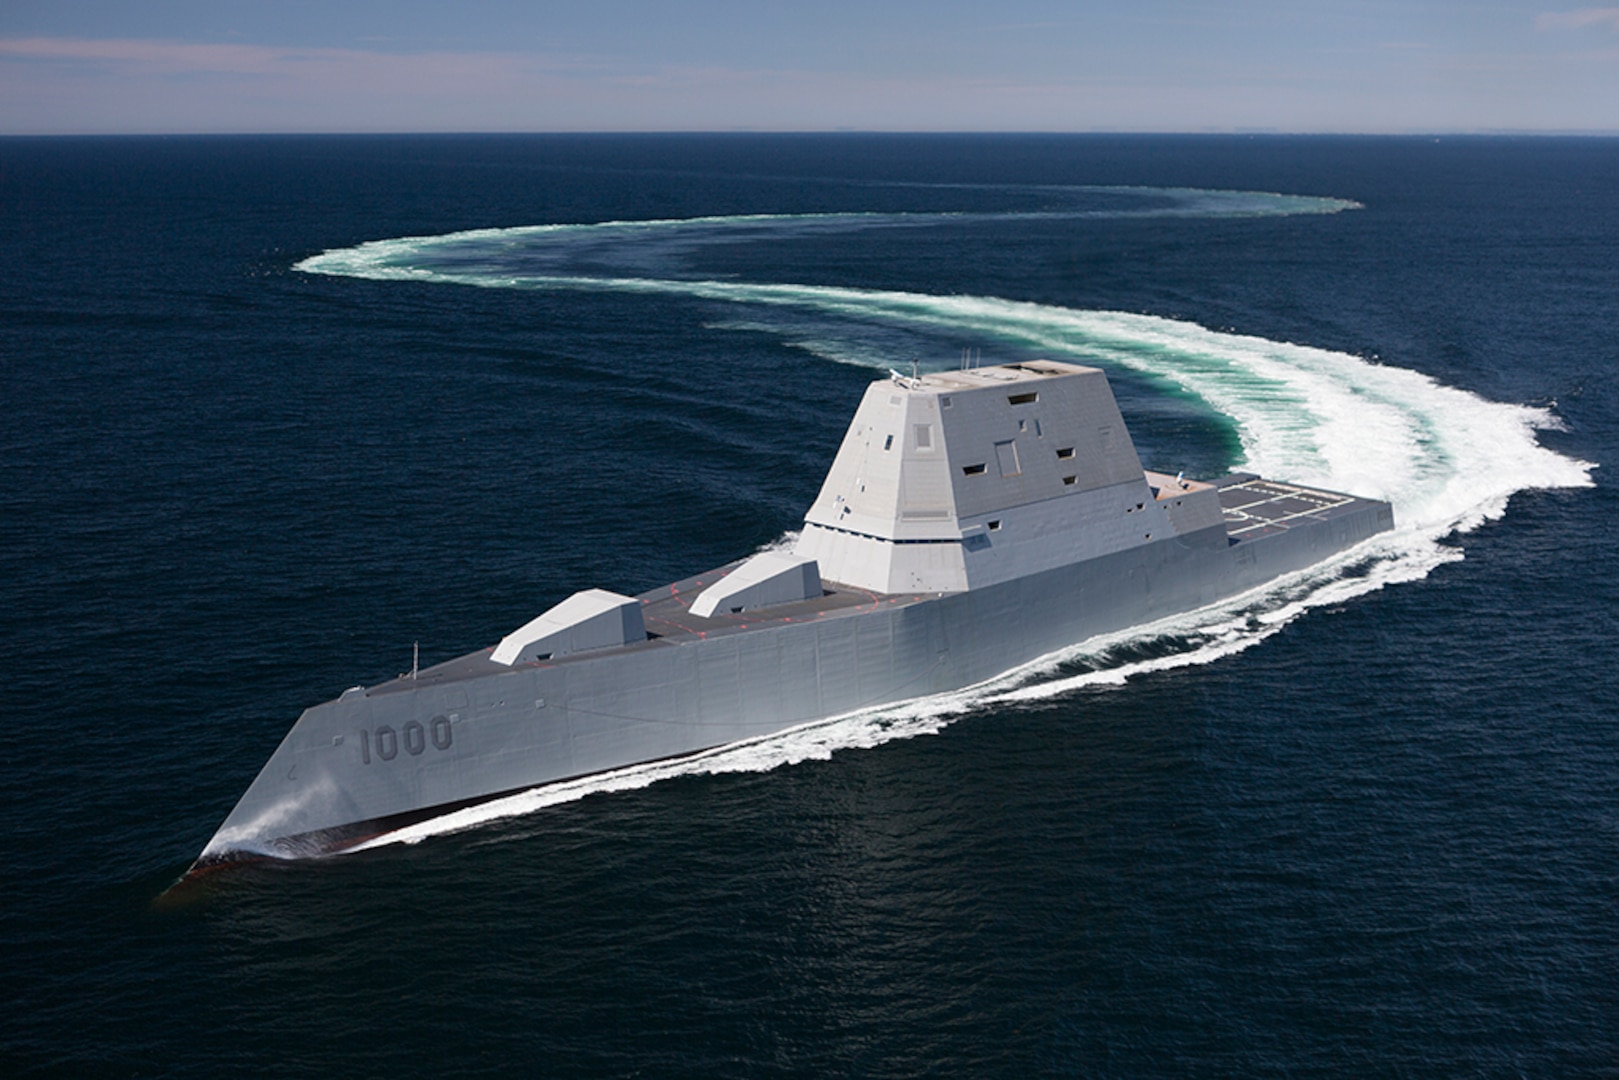 The future guided-missile destroyer USS Zumwalt (DDG 1000) transits the Atlantic Ocean during acceptance trials April 21, 2016 with the Navy's Board of Inspection and Survey (INSURV). The U.S. Navy accepted delivery of DDG 1000, the future guided-missile destroyer USS Zumwalt (DDG 1000) May 20, 2016. Following a crew certification period and October commissioning ceremony in Baltimore, Zumwalt will transit to its homeport in San Diego for a Post Delivery Availability and Mission Systems Activation. DDG 1000 is the lead ship of the Zumwalt-class destroyers, next-generation, multi-mission surface combatants, tailored for land attack and littoral dominance. (U.S. Navy/Released)